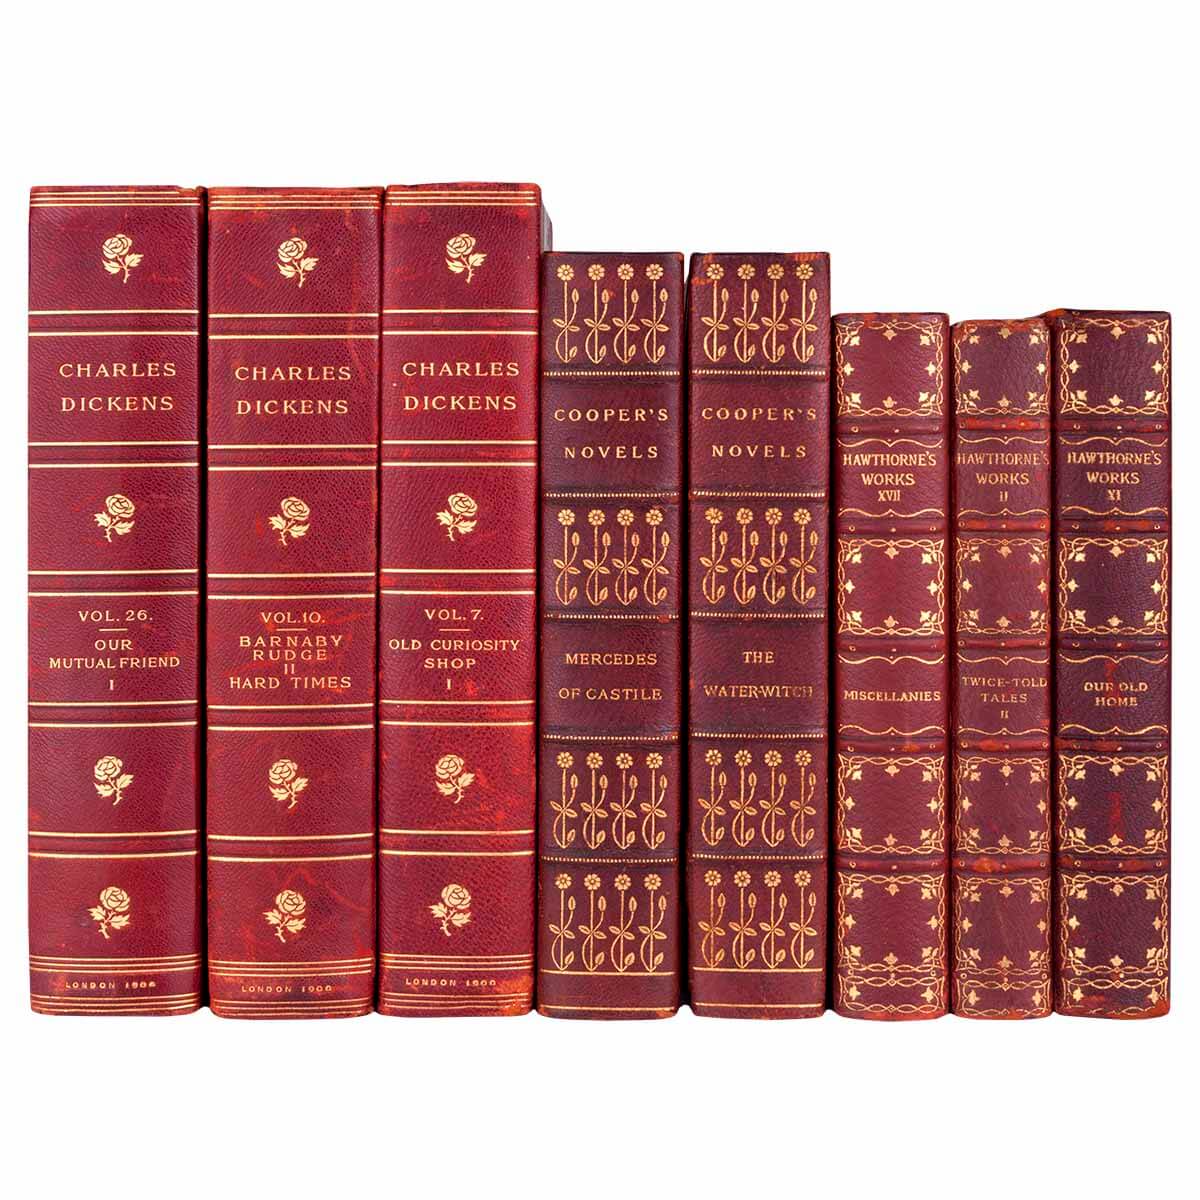   Our carefully curated linear foot collections of high-quality books offer a diverse range of literature, history, philosophy, and the arts, meticulously selected to enrich any interior. With publication dates spanning from 1800 to 1920, each book in our collection is a stunning testament to a bygone era, showcasing unparalleled craftsmanship and an abundance of character.